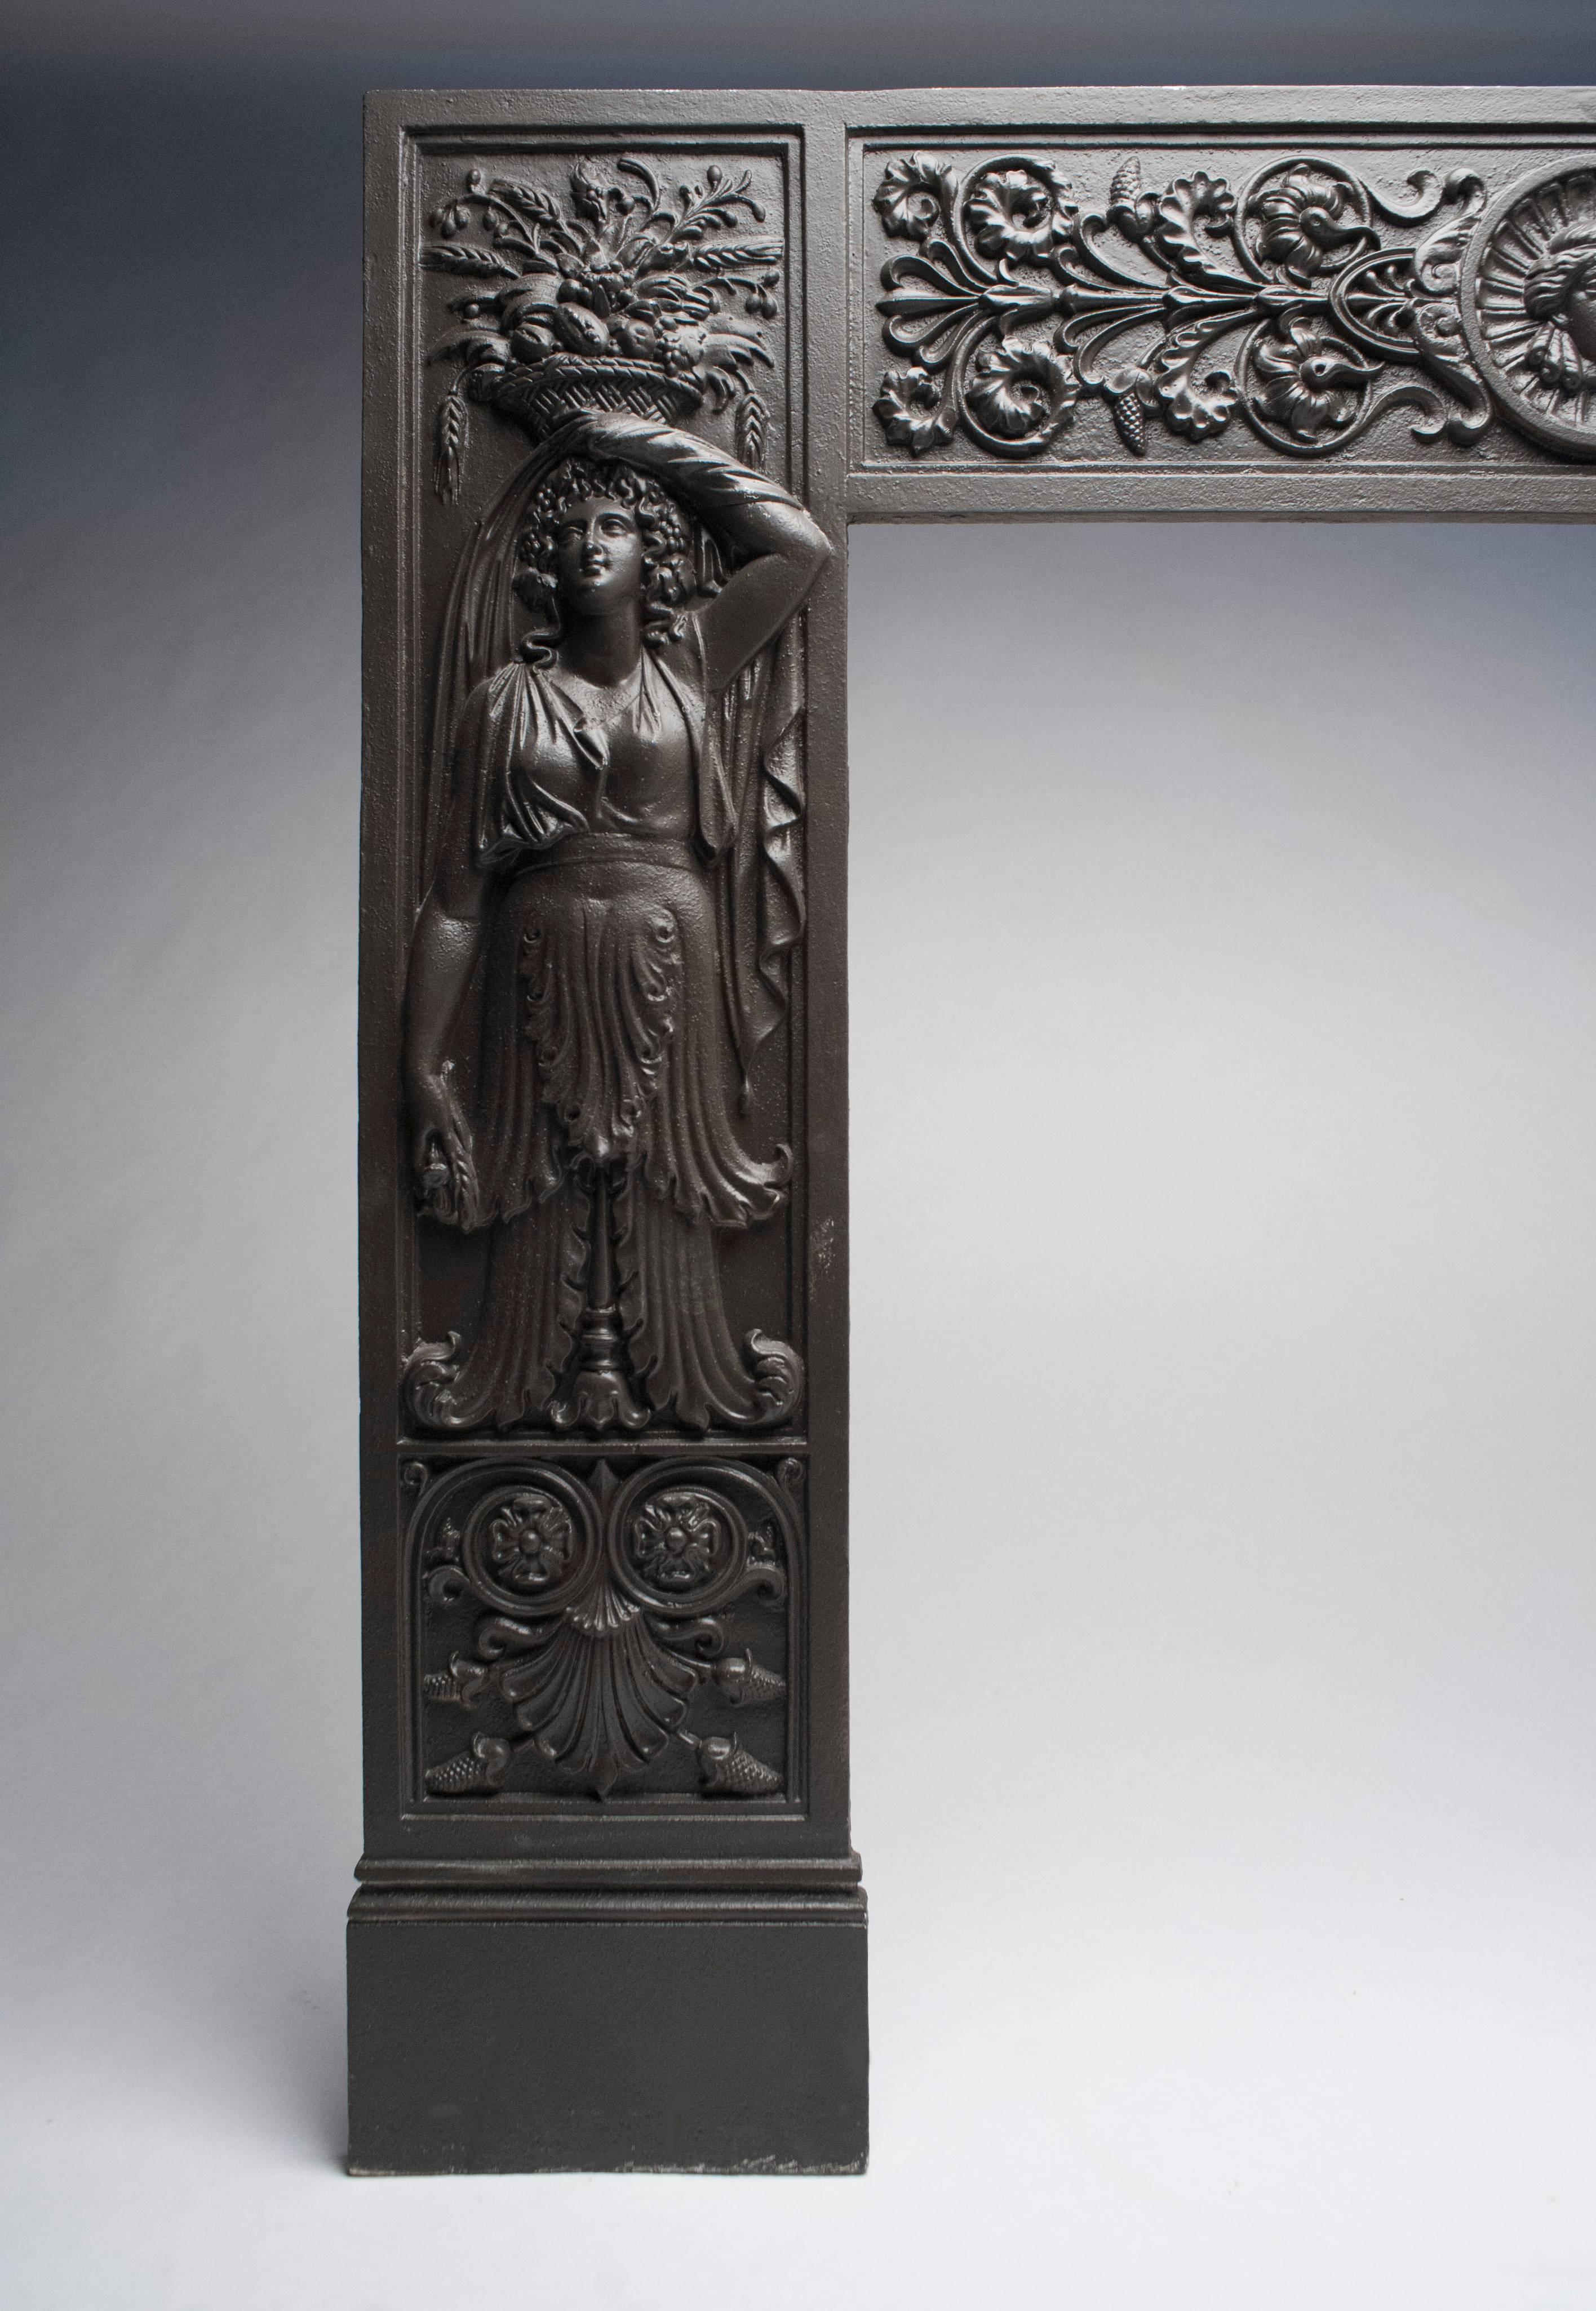 Antique Victorian cast iron fireplace surround. Ornate details with two Classic woman figures. Measures 42 inches W x 35 H. Interior measures 26 W x 27.75 H.